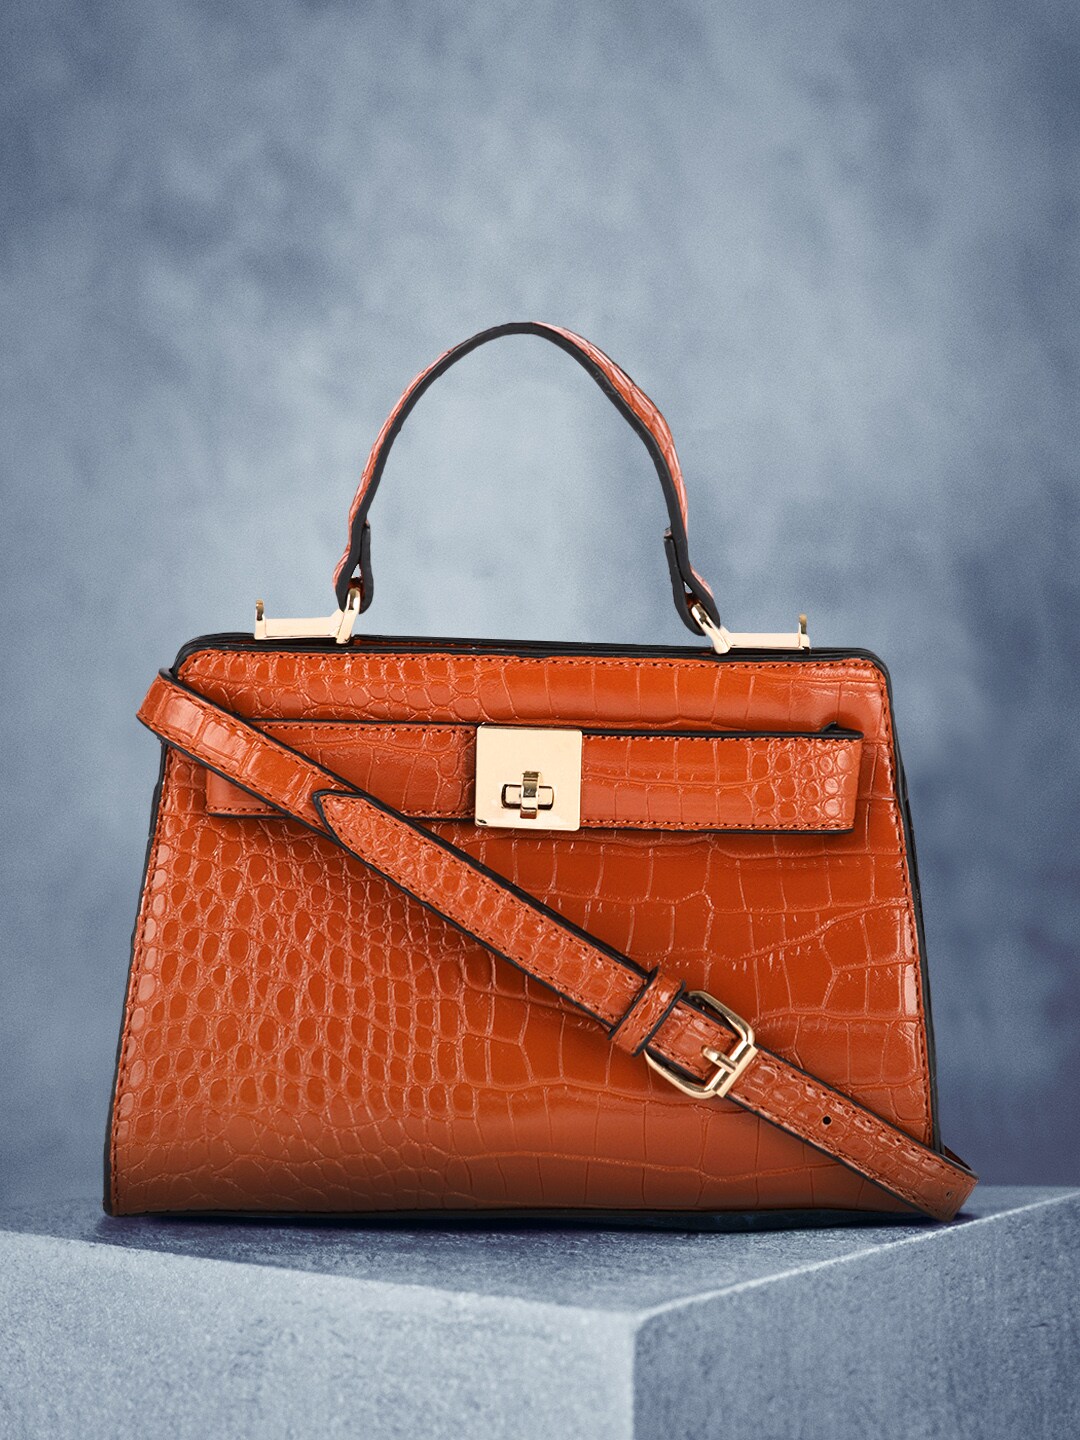 Mast & Harbour Tan Animal Textured PU Regular Structured Handheld Bag with Buckle Detail Price in India